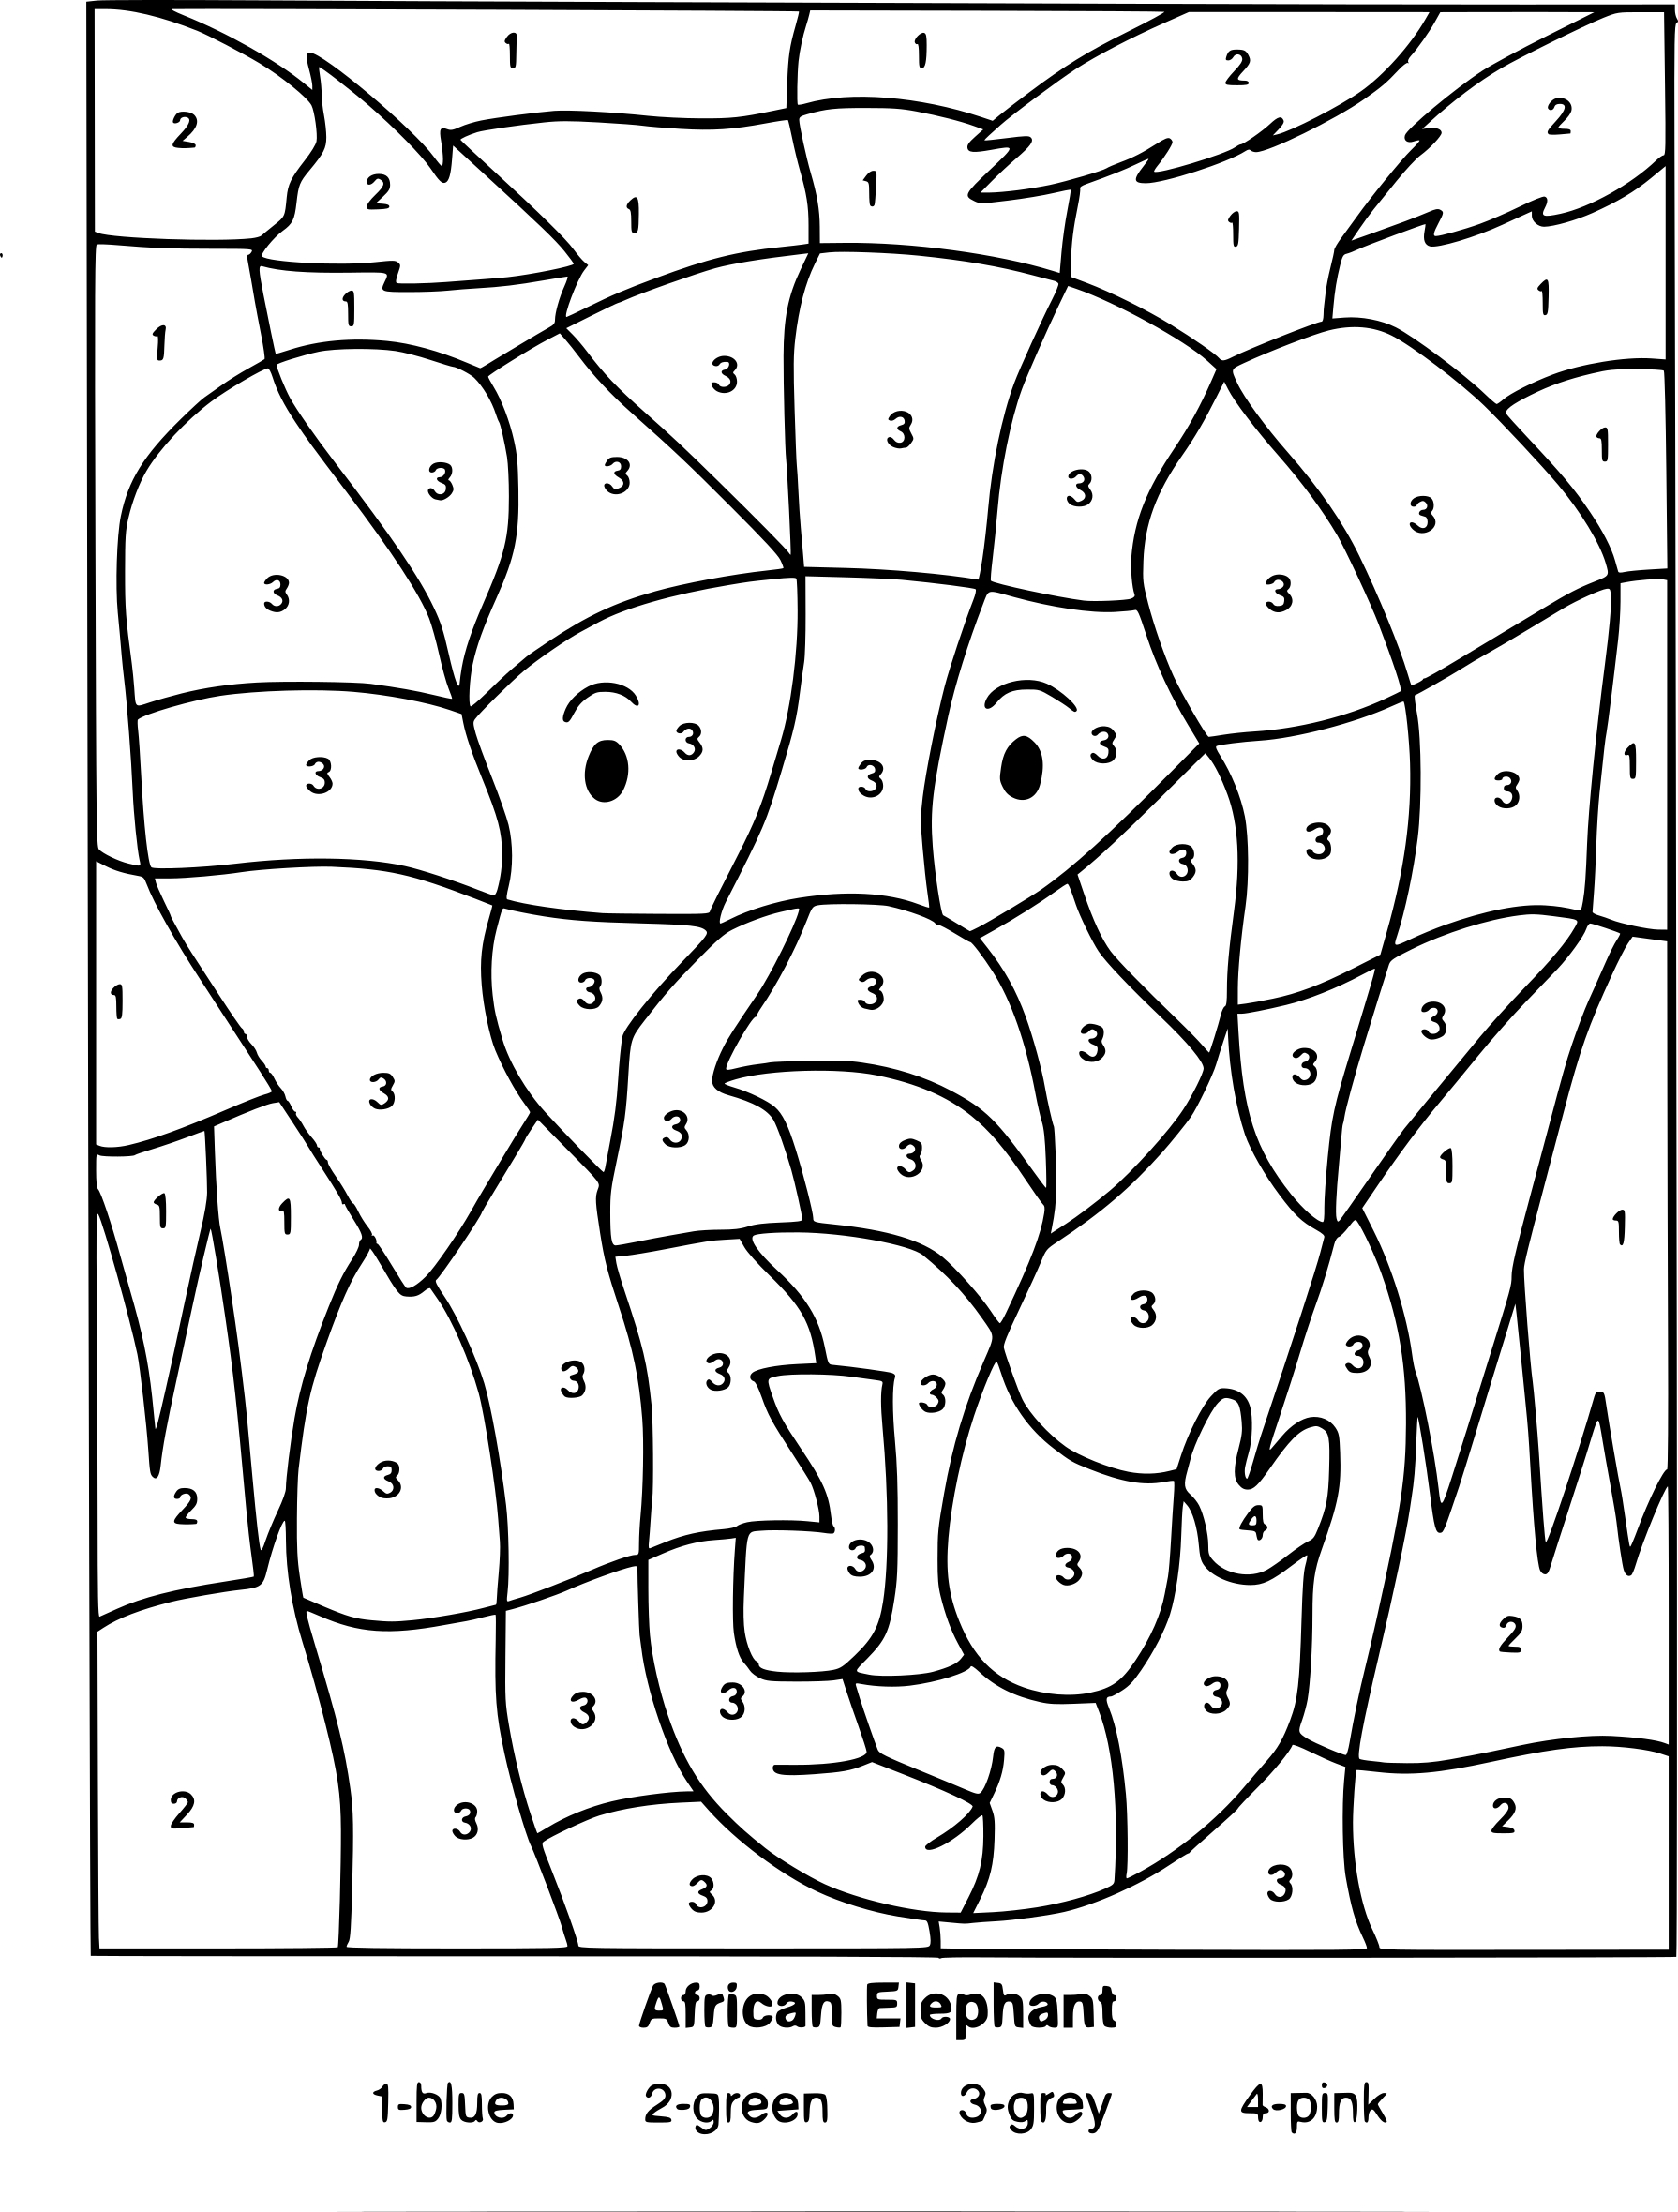 Magic Elephant coloring page